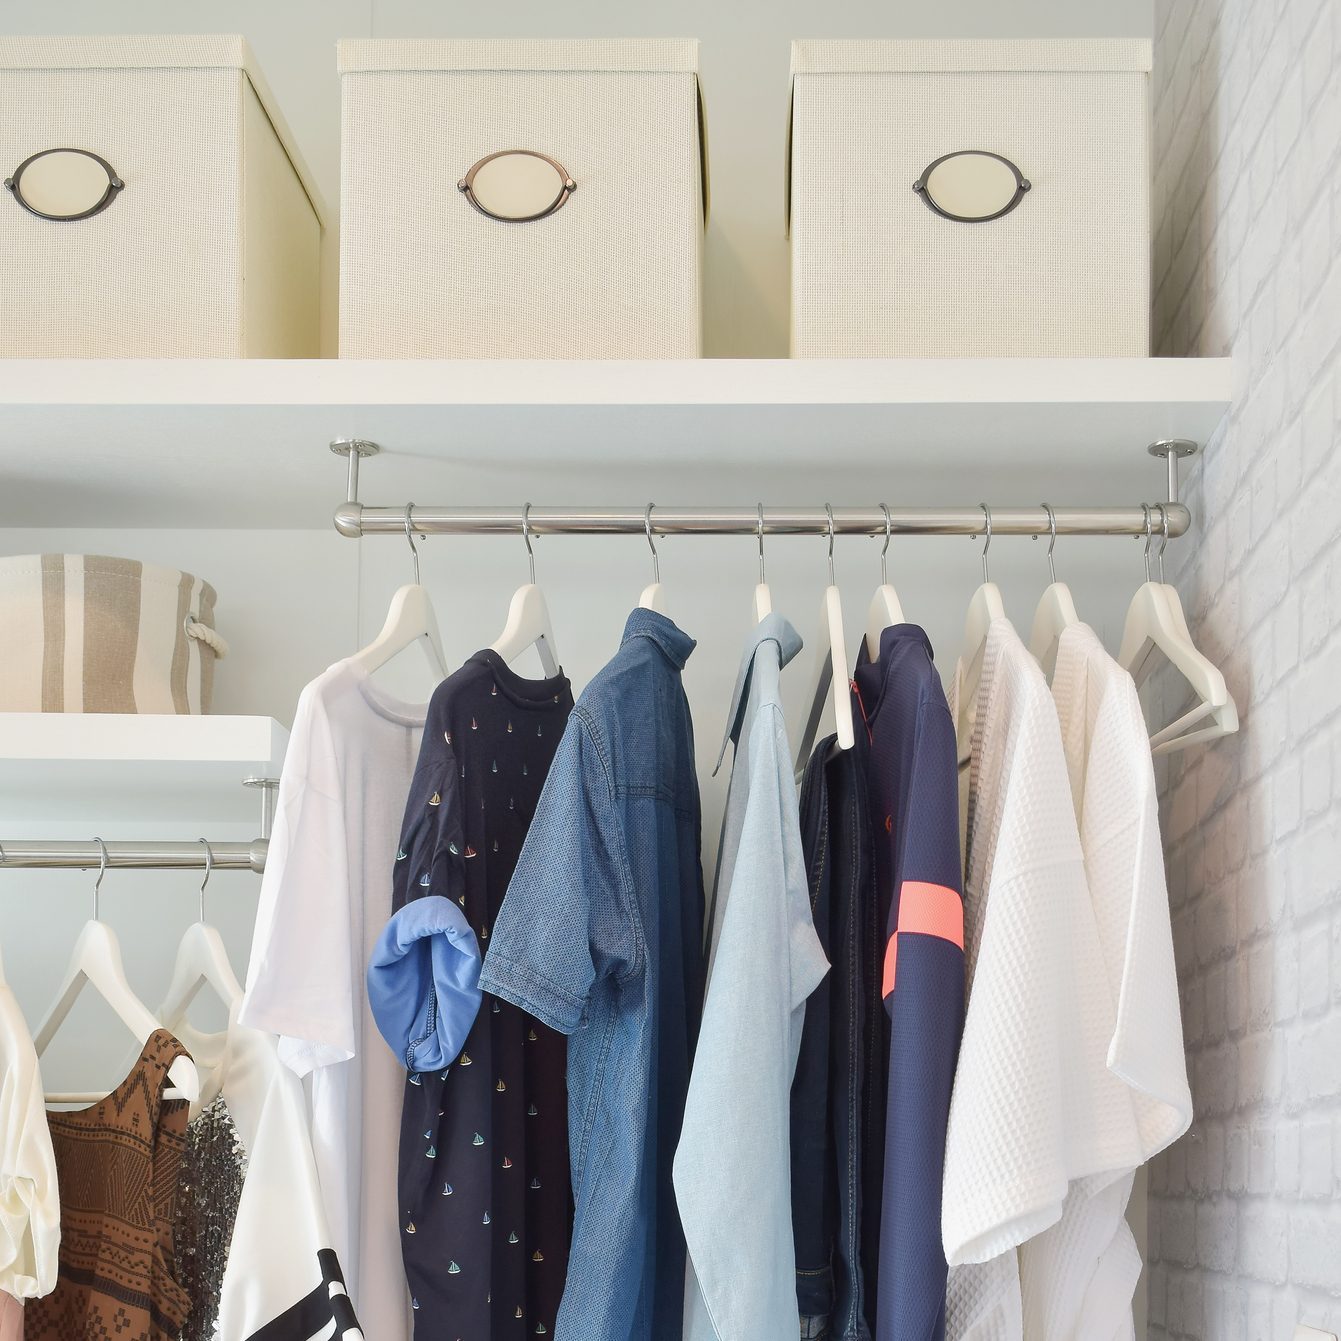 12 Bedroom Cleaning and Storage Tips | Family Handyman